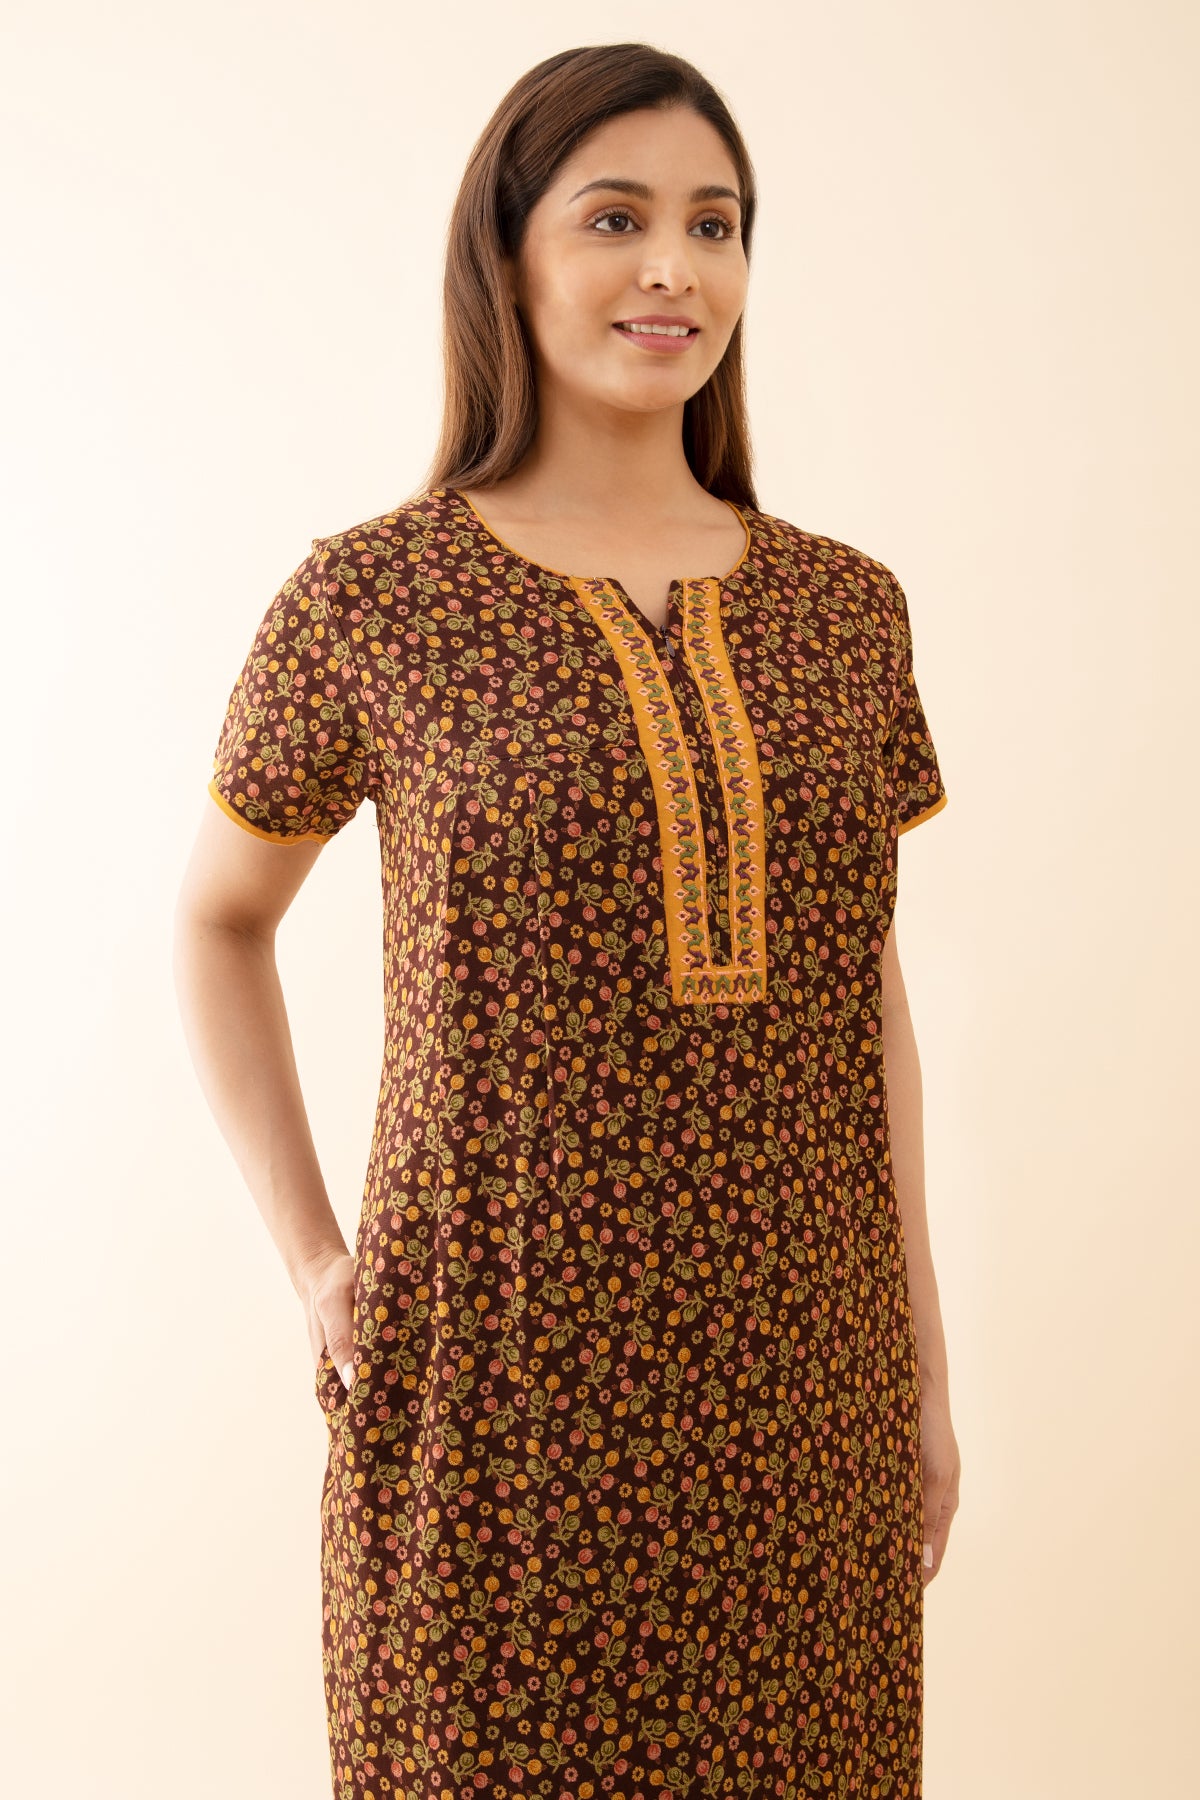 Tulip Floral Printed with Contrast Embroidered Yoke - Brown